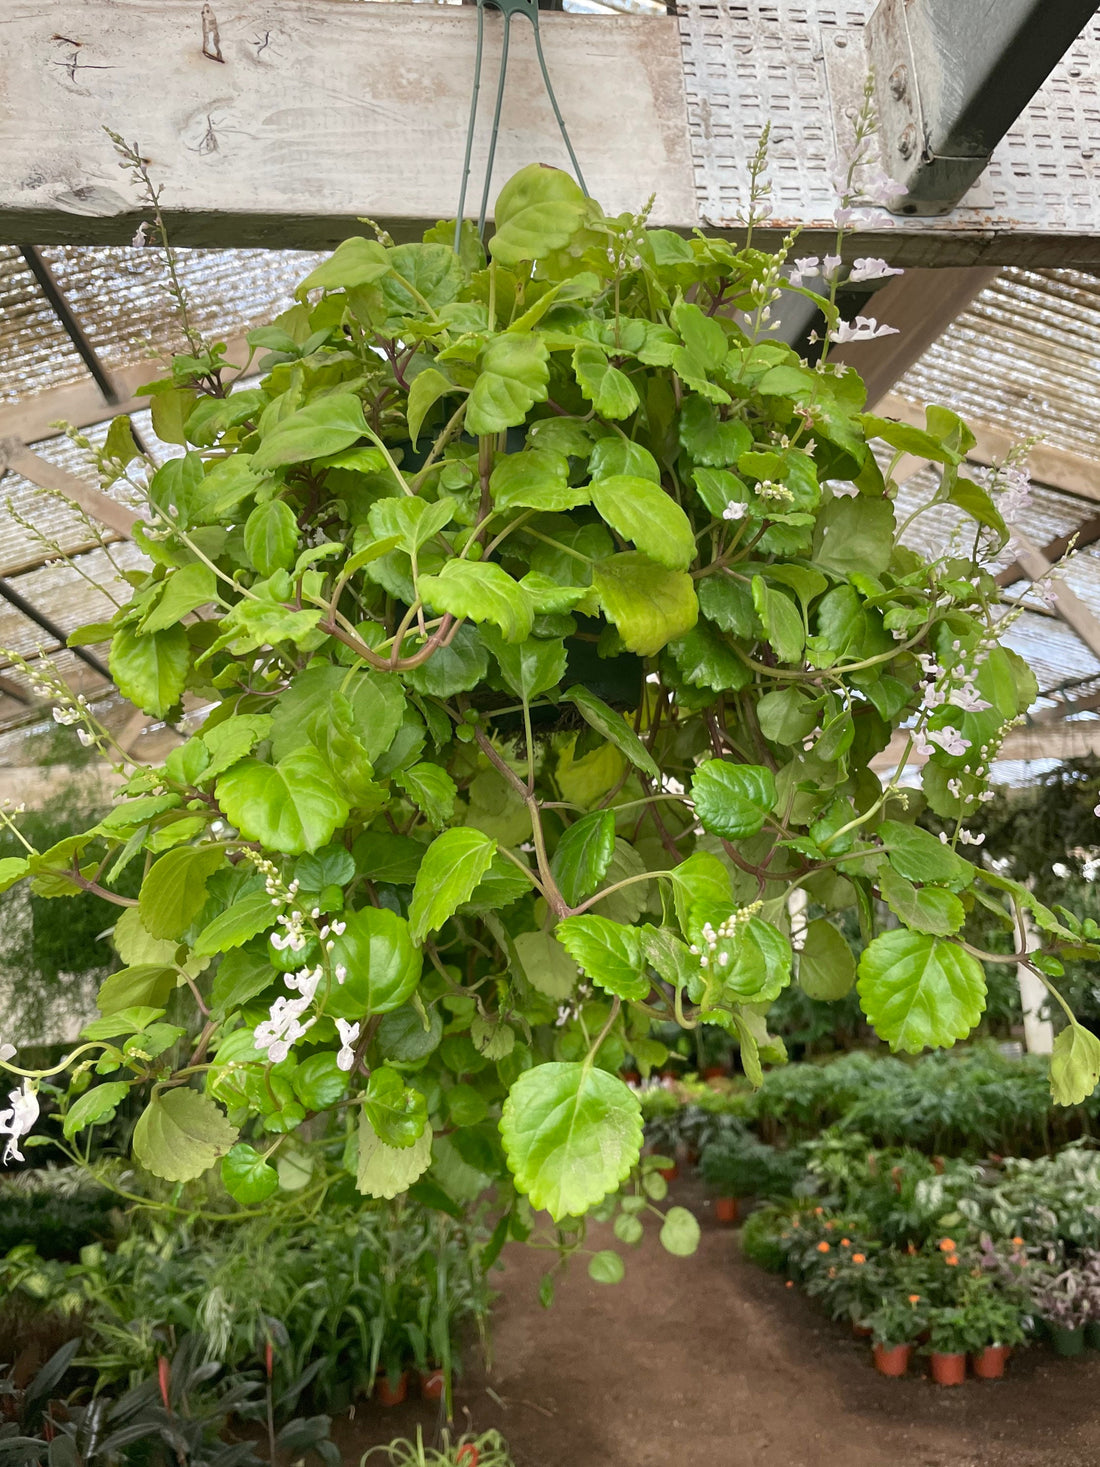 XLarge 6 inch potted a-glossy  green creeping Charlie  Vine- trailing indoors or outdoors-easy care-round succulent like leaves